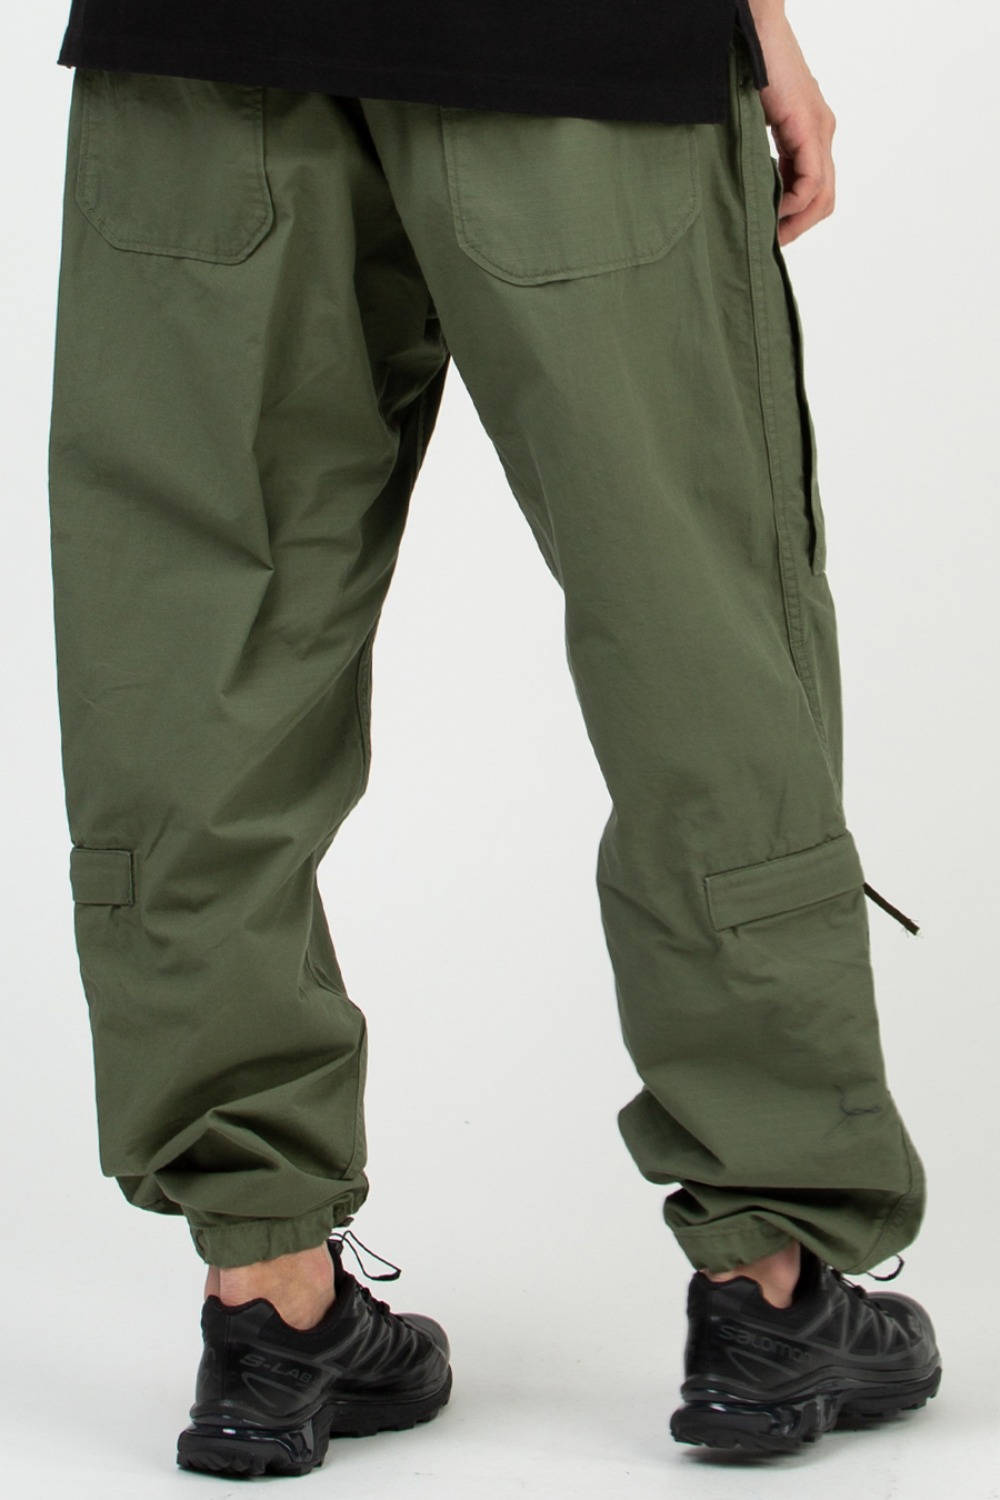 AIRCREW PANT OLIVE COTTON RIPSTOP